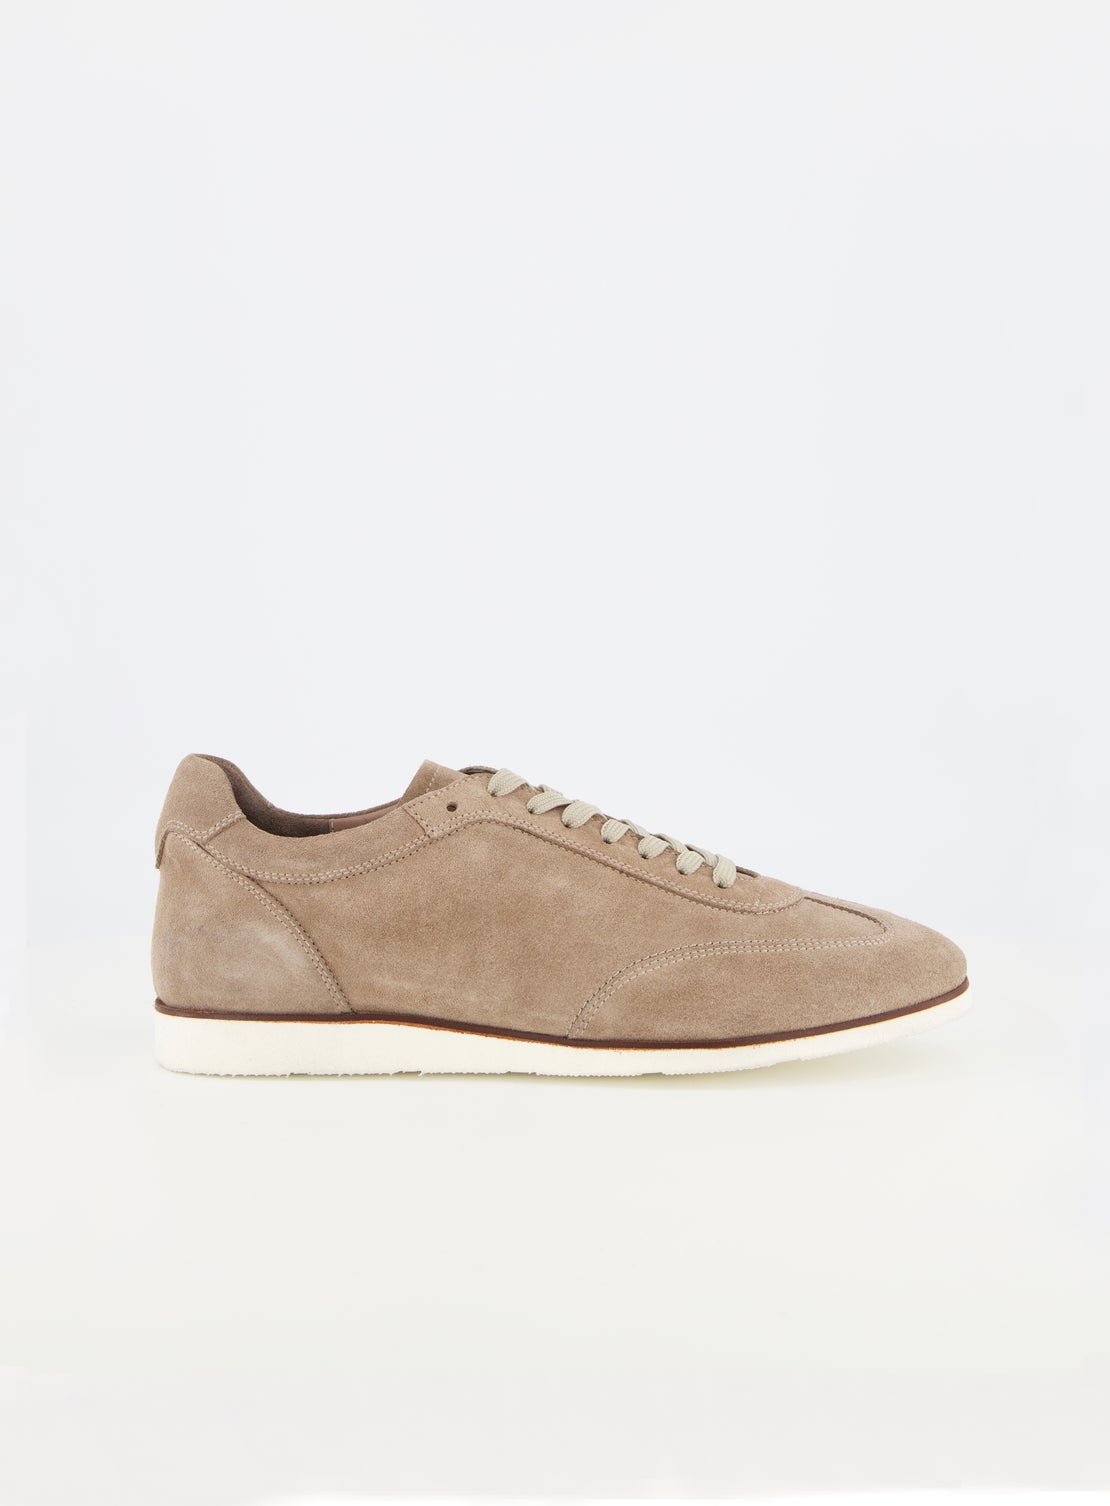 Taylor Khaki Suede Sneaker With White Sole